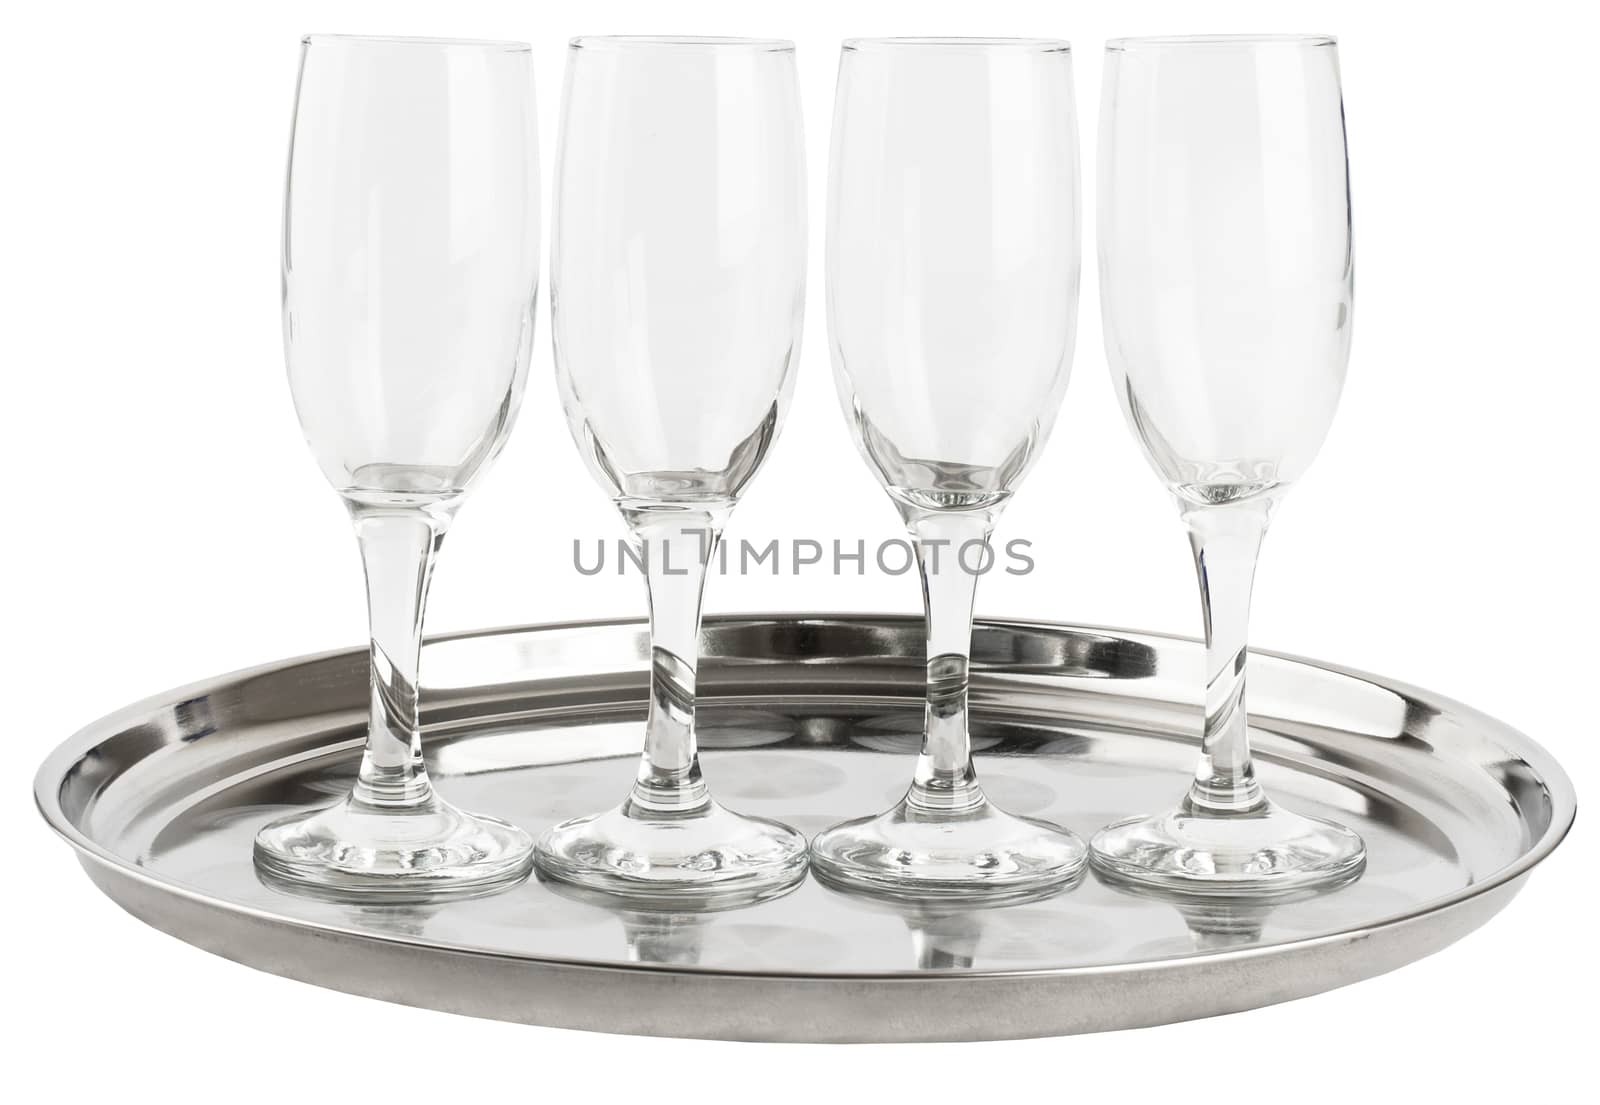 Many champagne glasses on tray isolated on white background